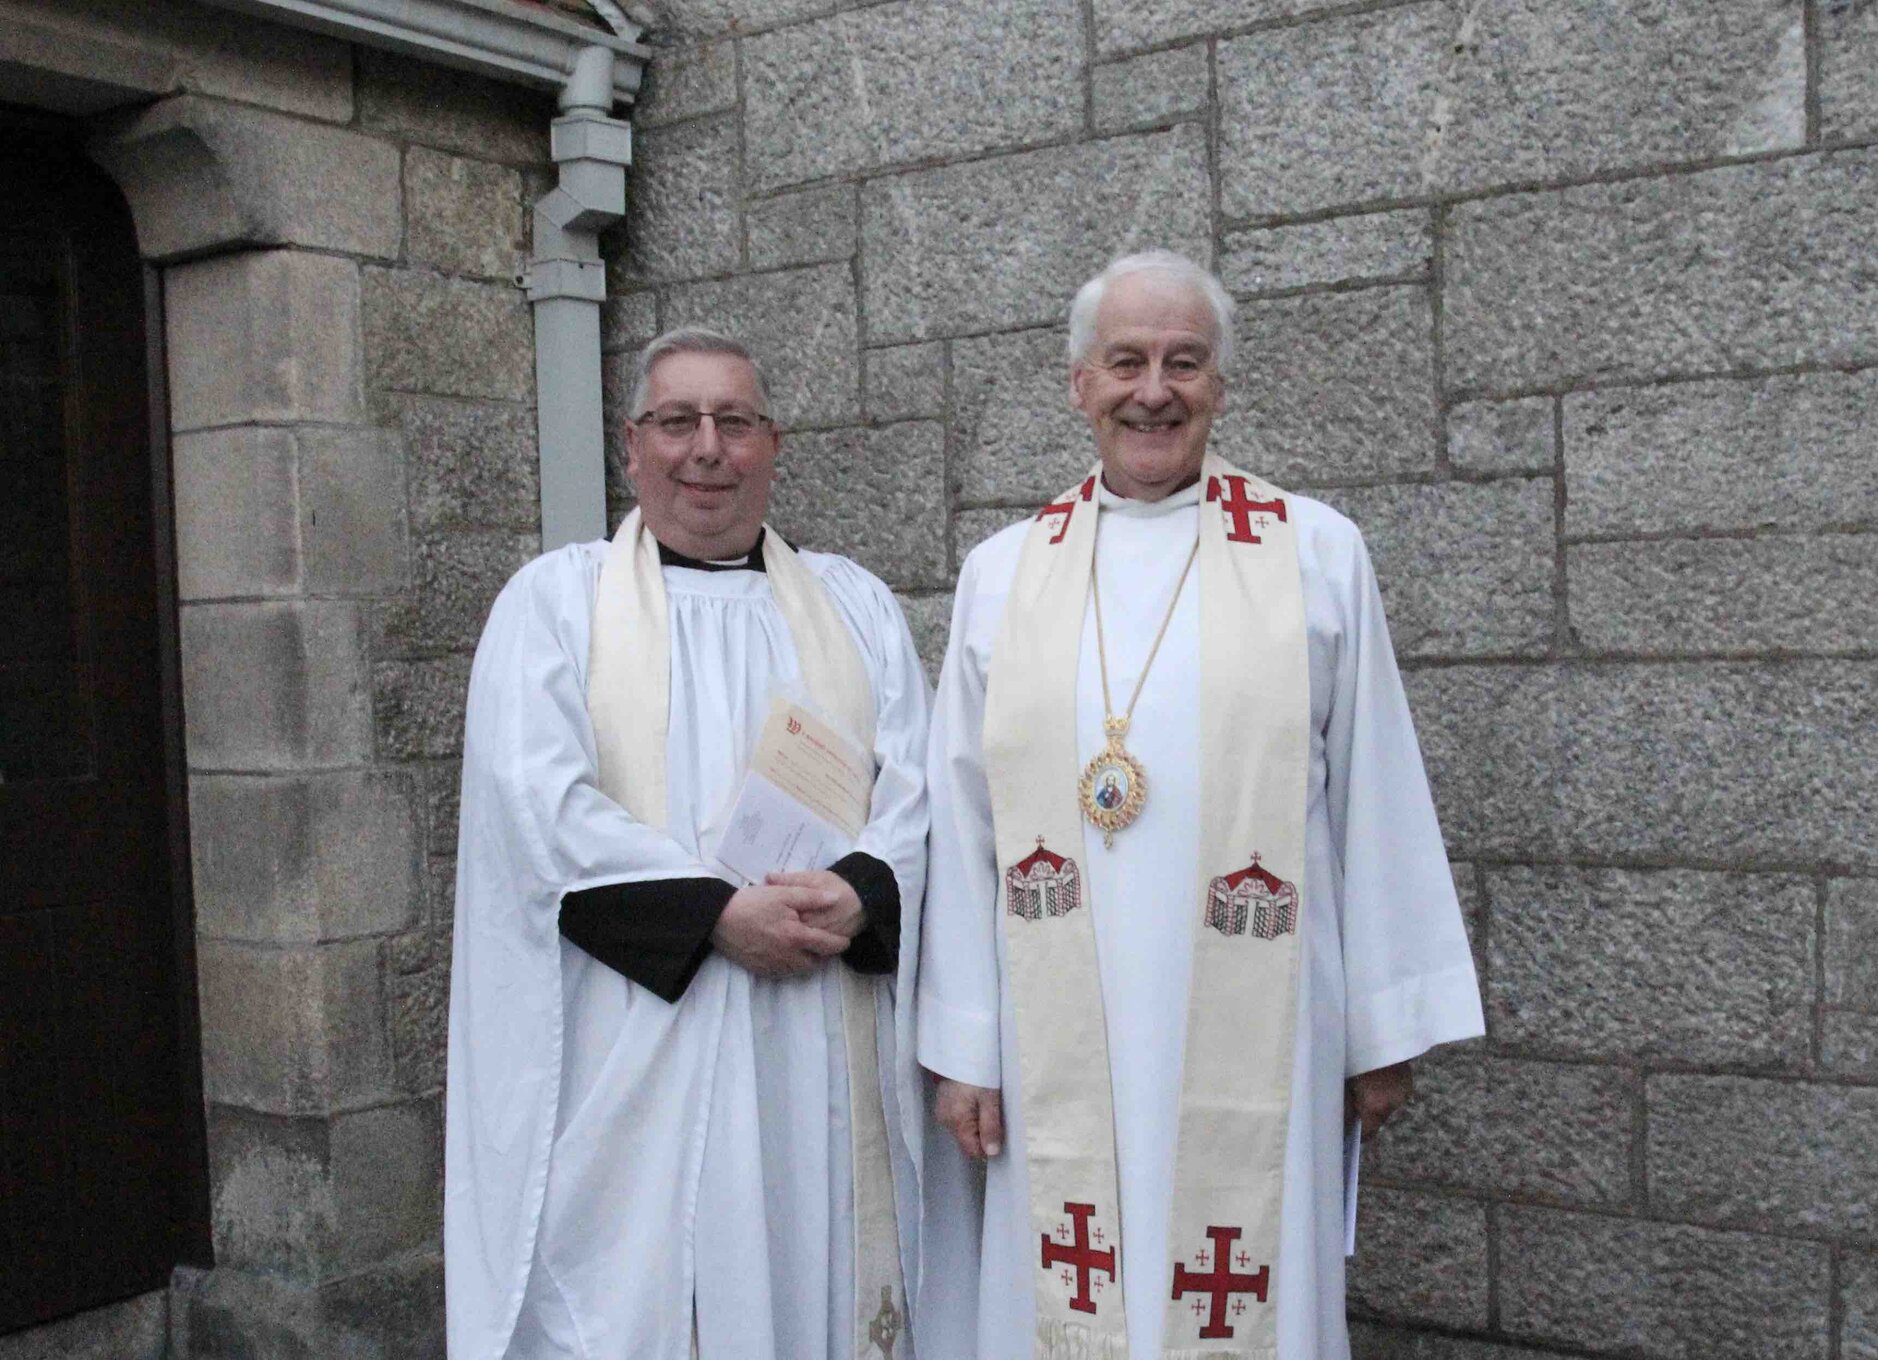 Embarking on a Journey of Community and Adventure – Dun Laoghaire Welcomes the Revd Steve Brunn